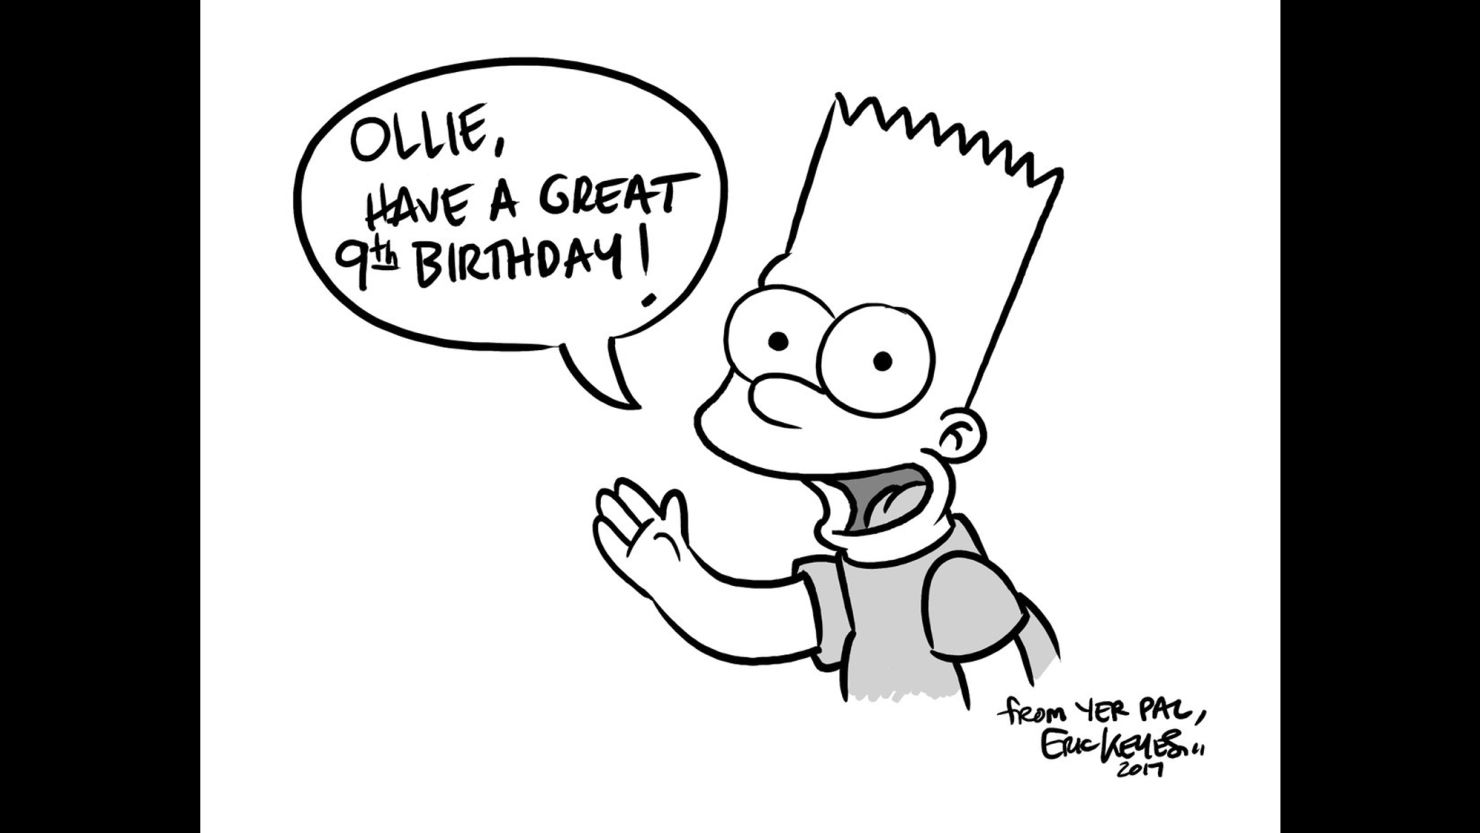 Eric Keyes, a character designer for "The Simpsons," chose to illustrate his birthday wish for a UK boy. 